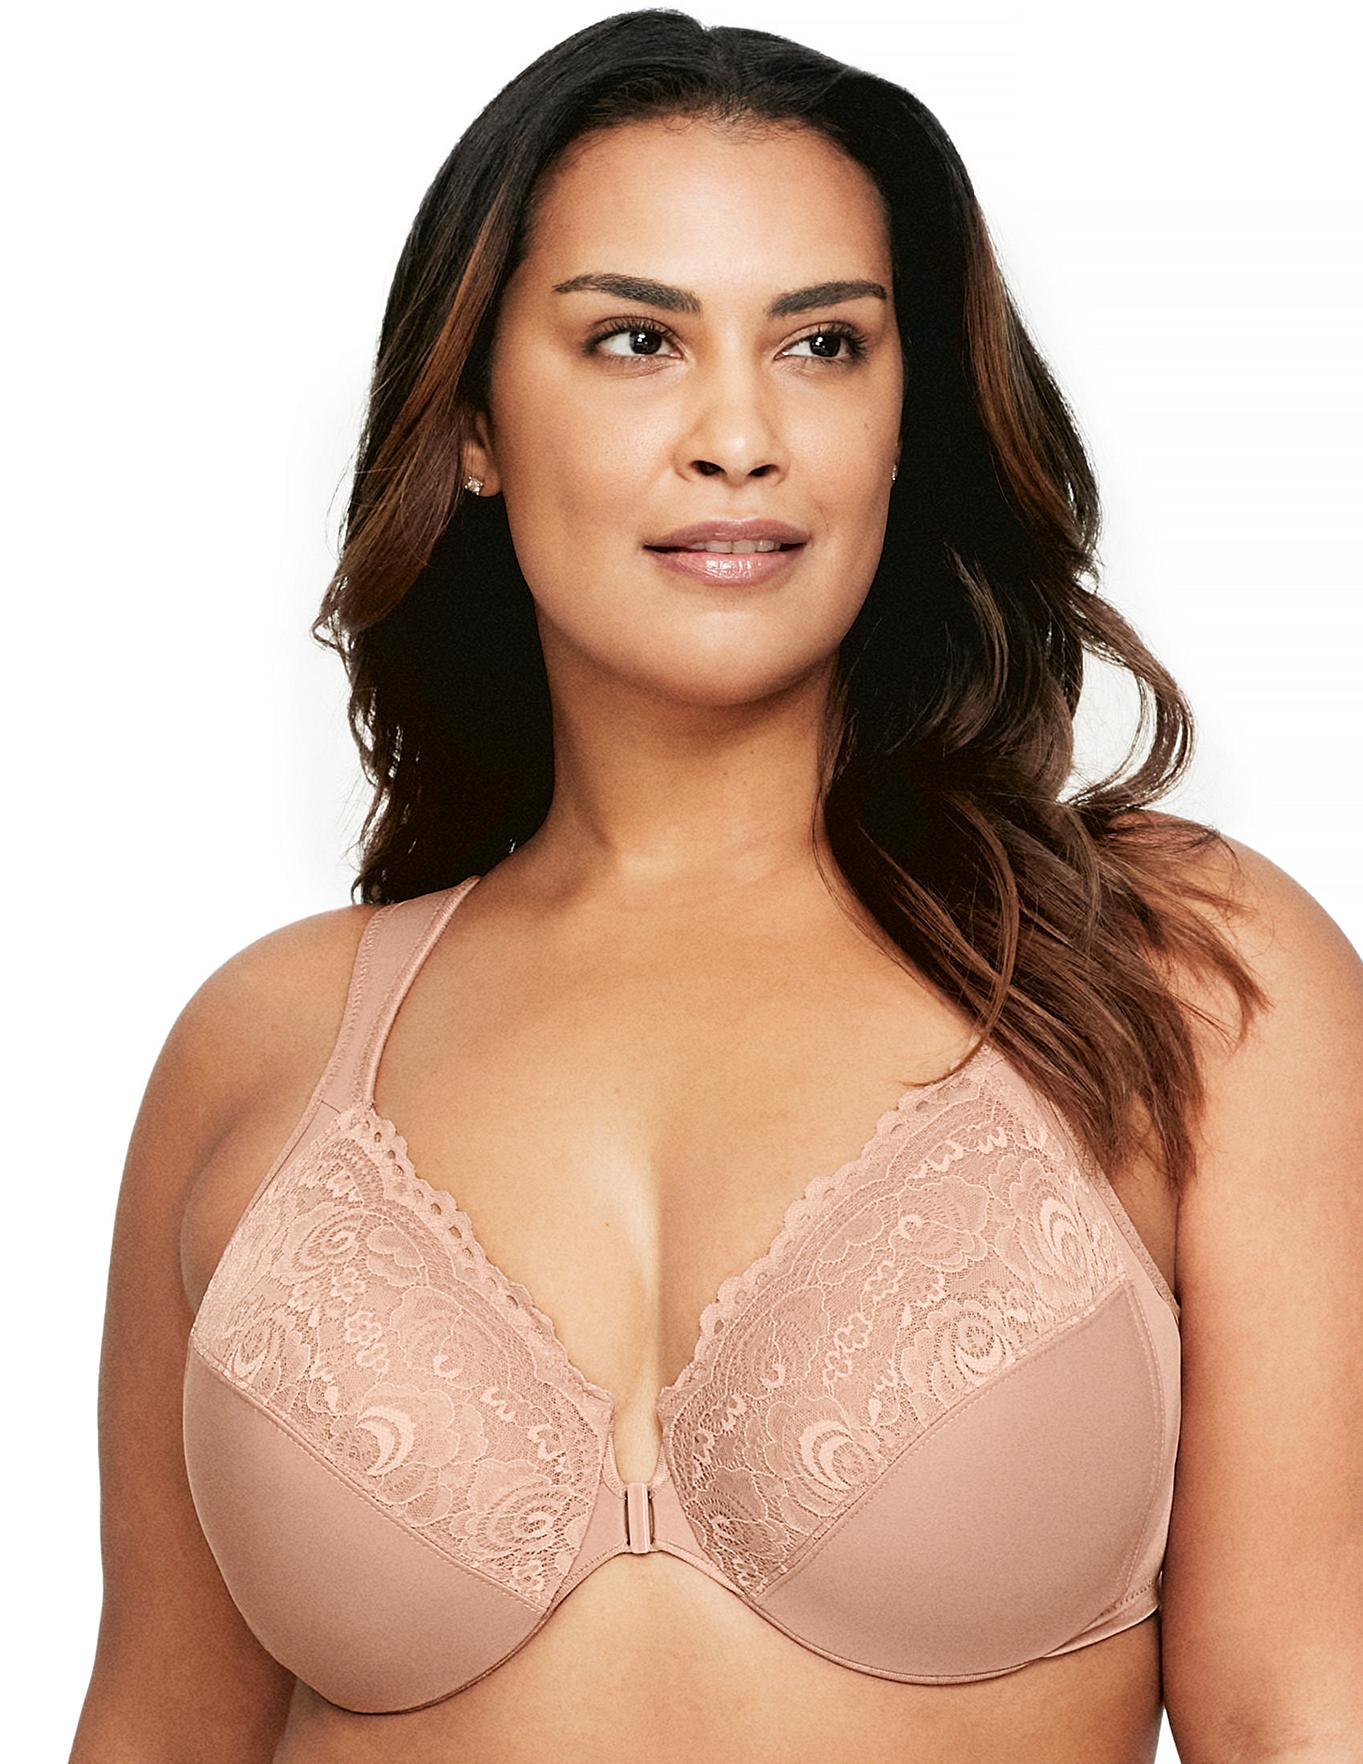 Buy Cathrina Non Padded Lace Bra Online - Cathrina Double Layered